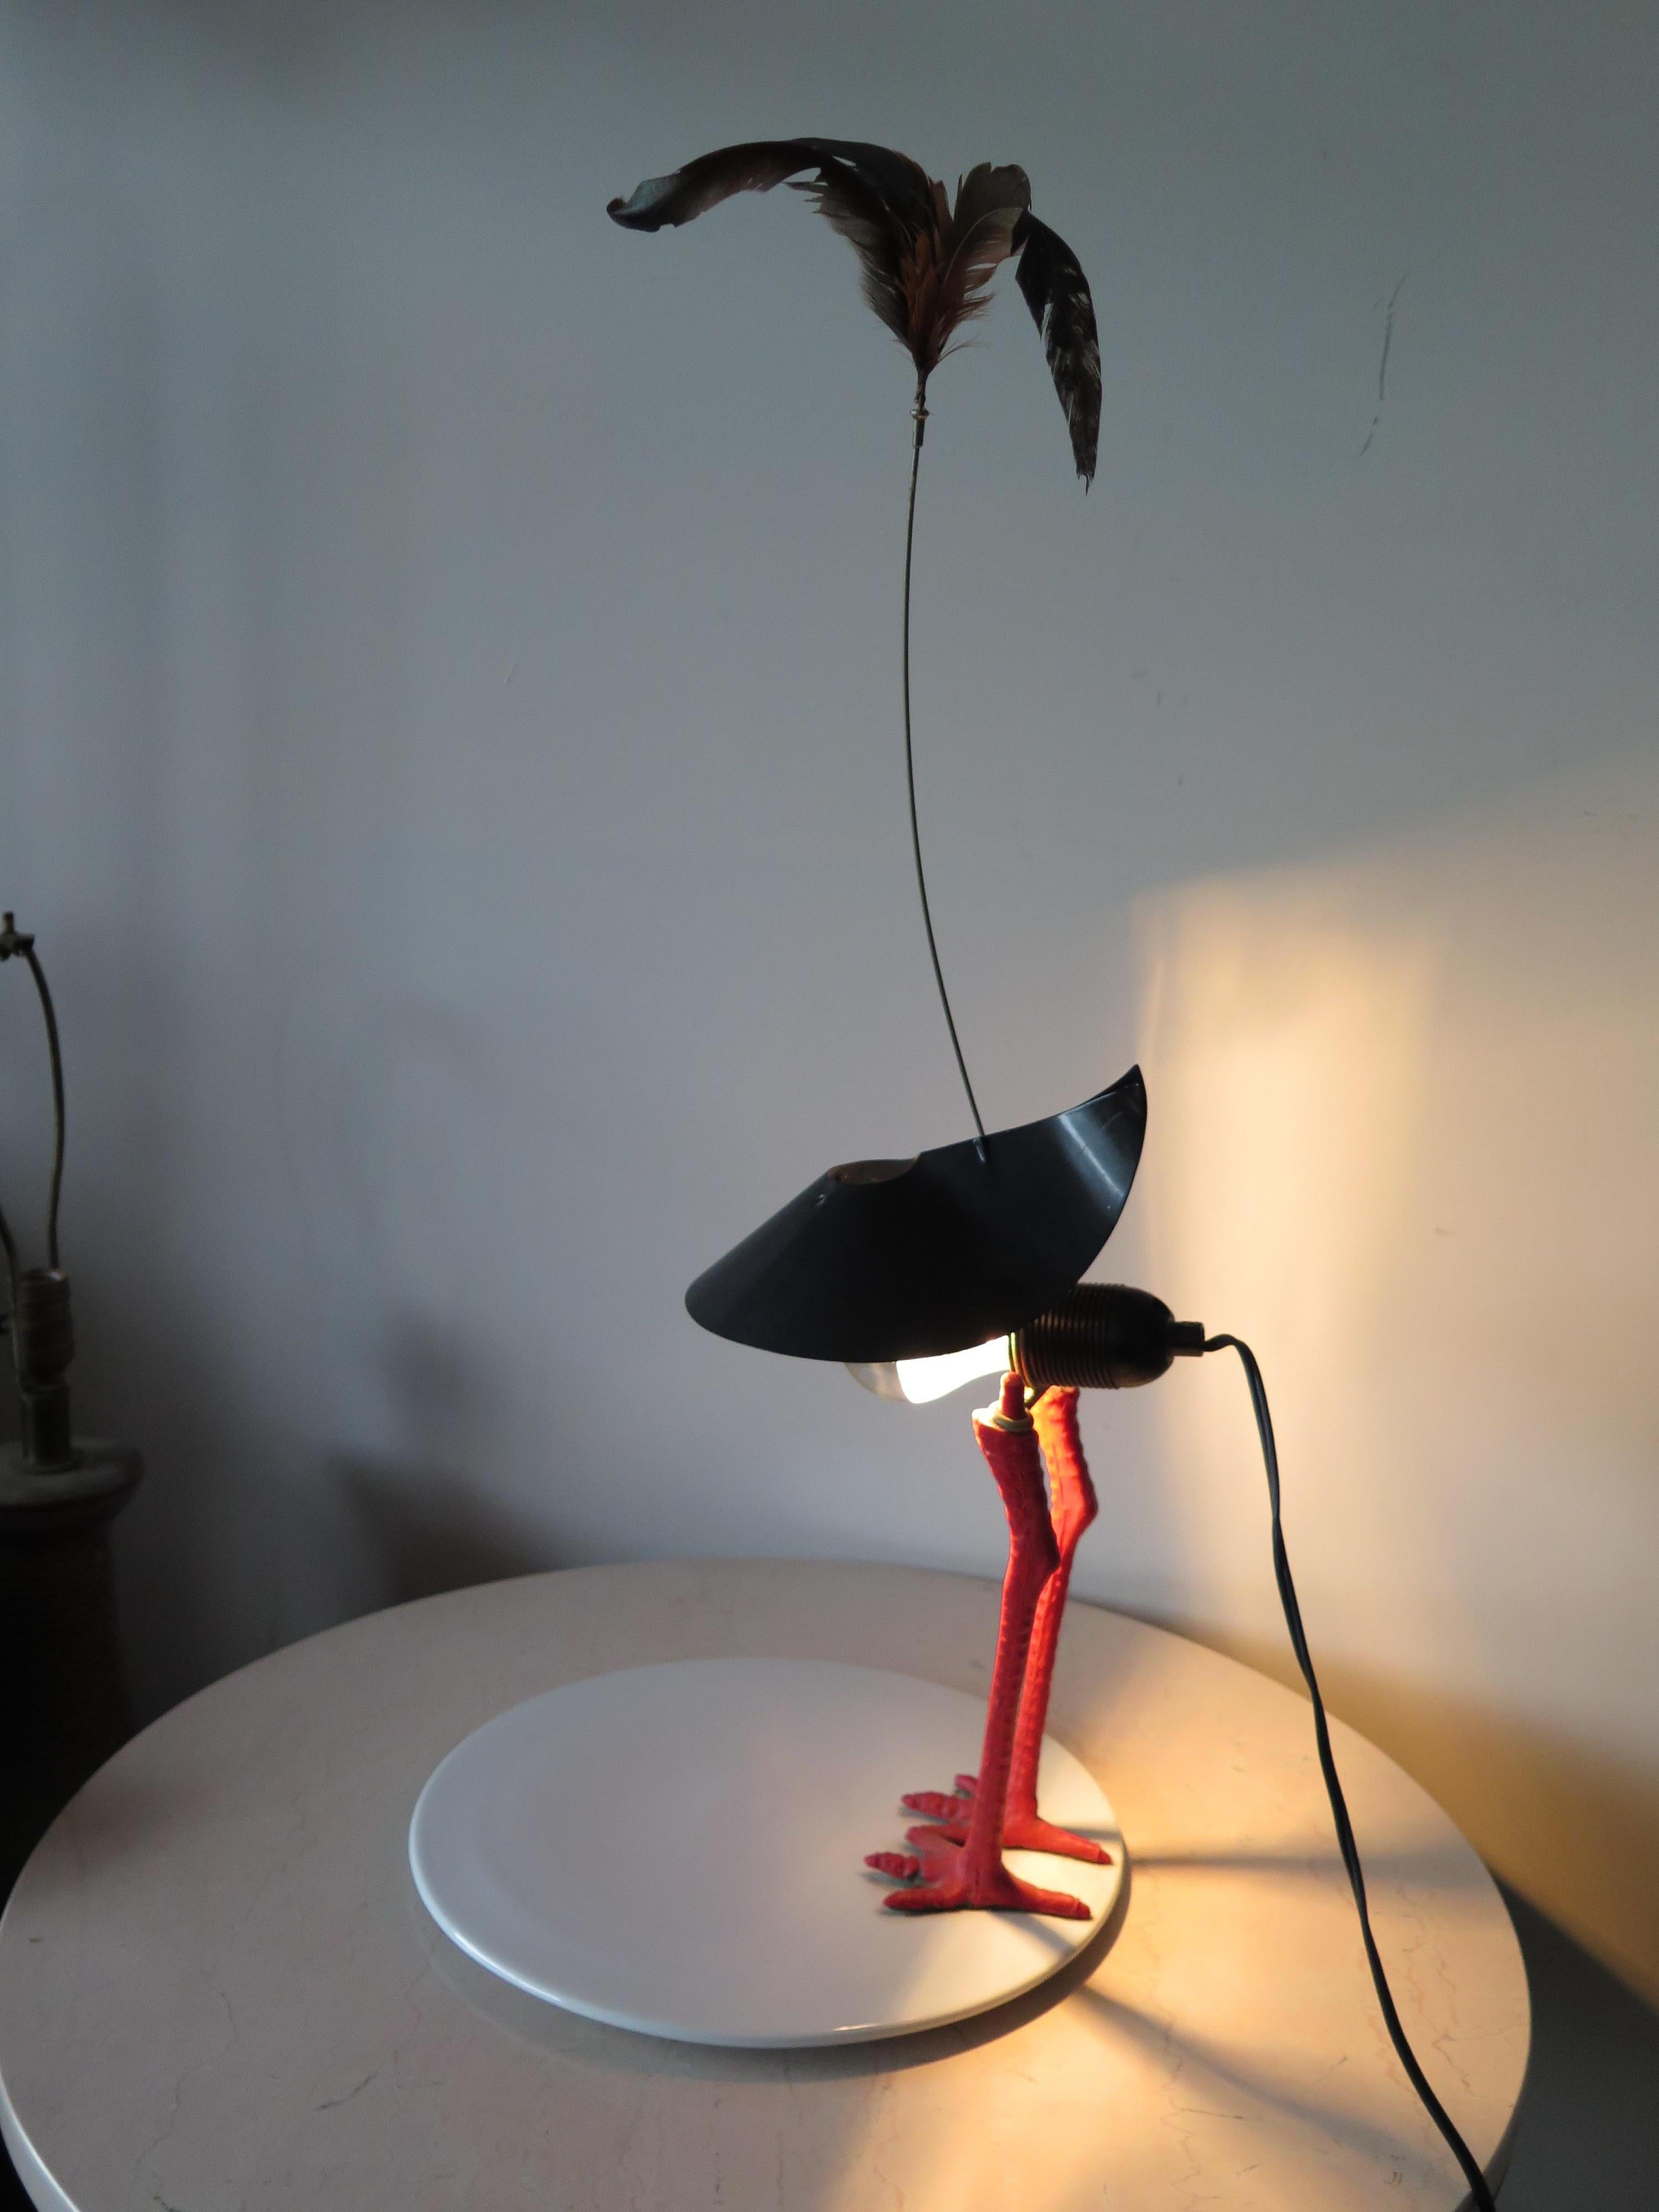 A whimsical table lamp by Ingo Maurer, signed, BiBiBiBi, made in Germany.